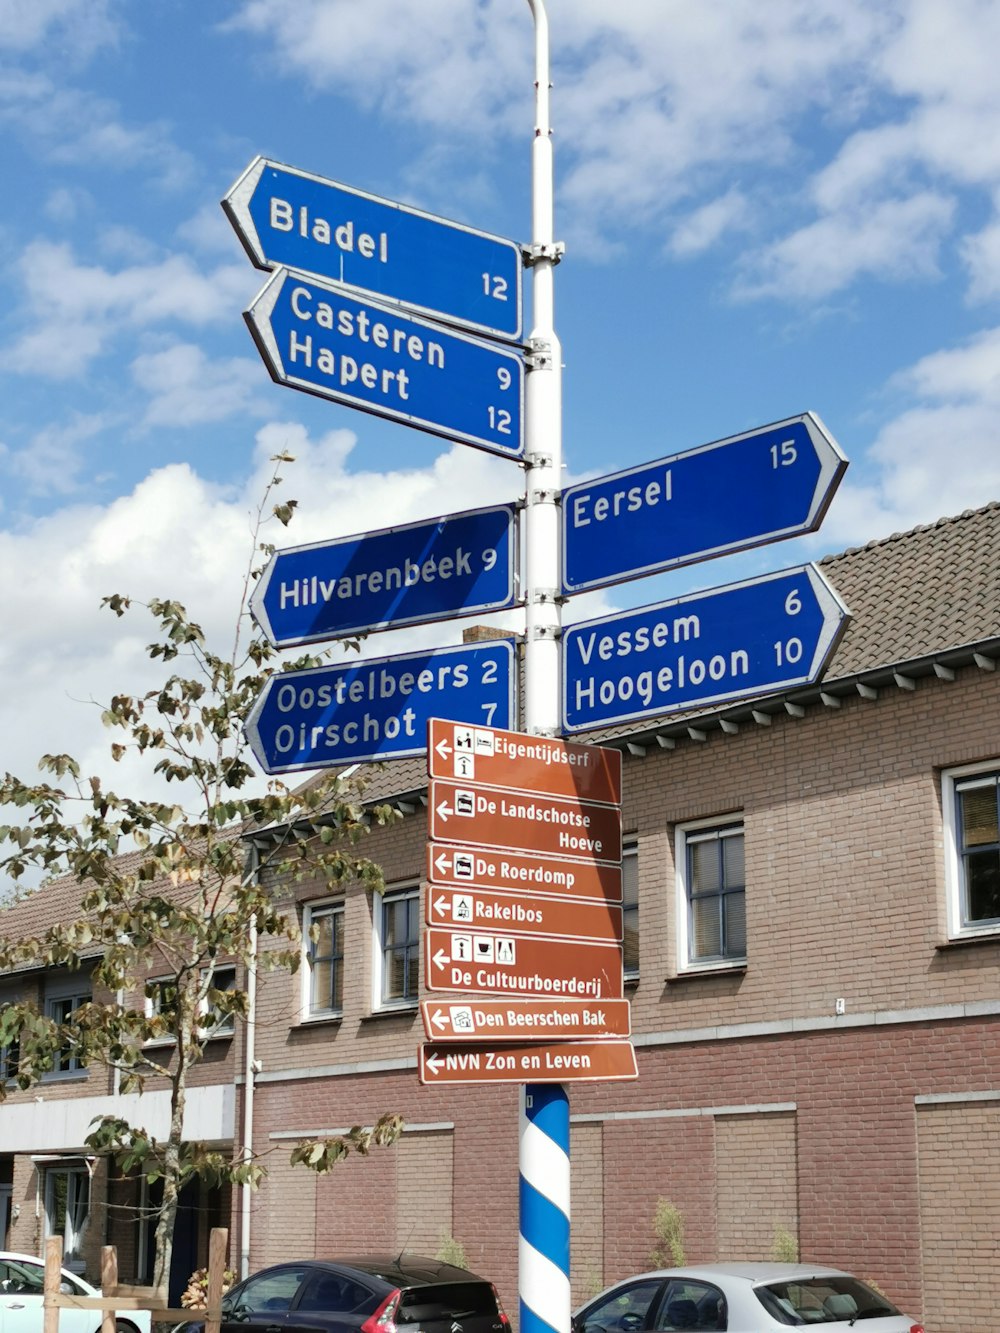 blue and white street sign